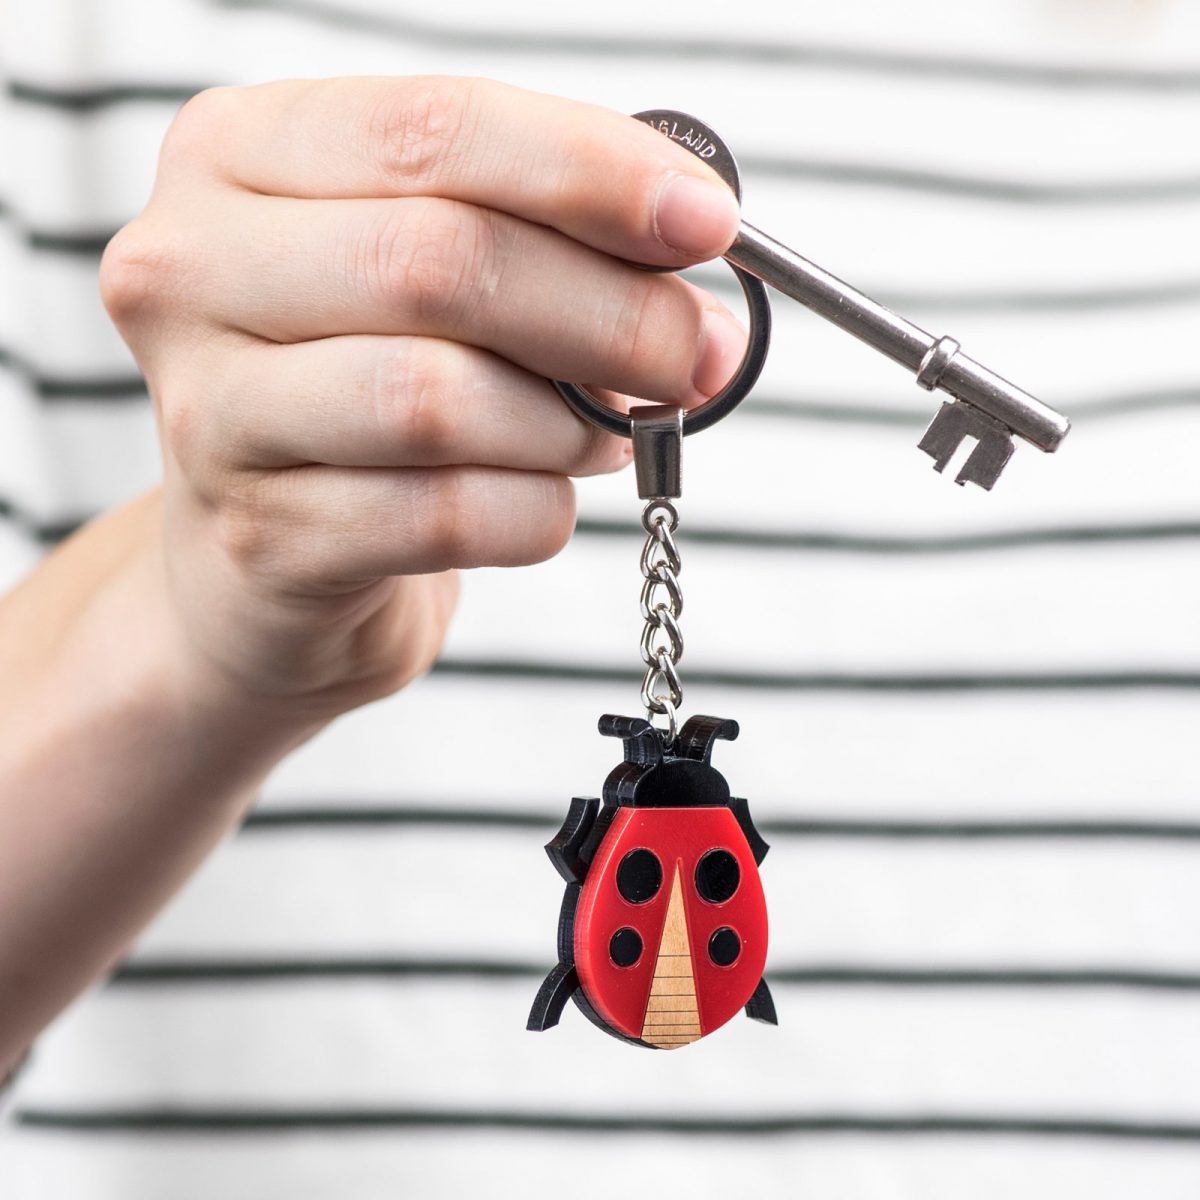 Ladybird Keyring, Ladybug Key Chain, Insect Key Ring Charm, Lady Bird Gift, Laser Cut Acrylic, Gift for Her, Black & Red, Birthday Gift